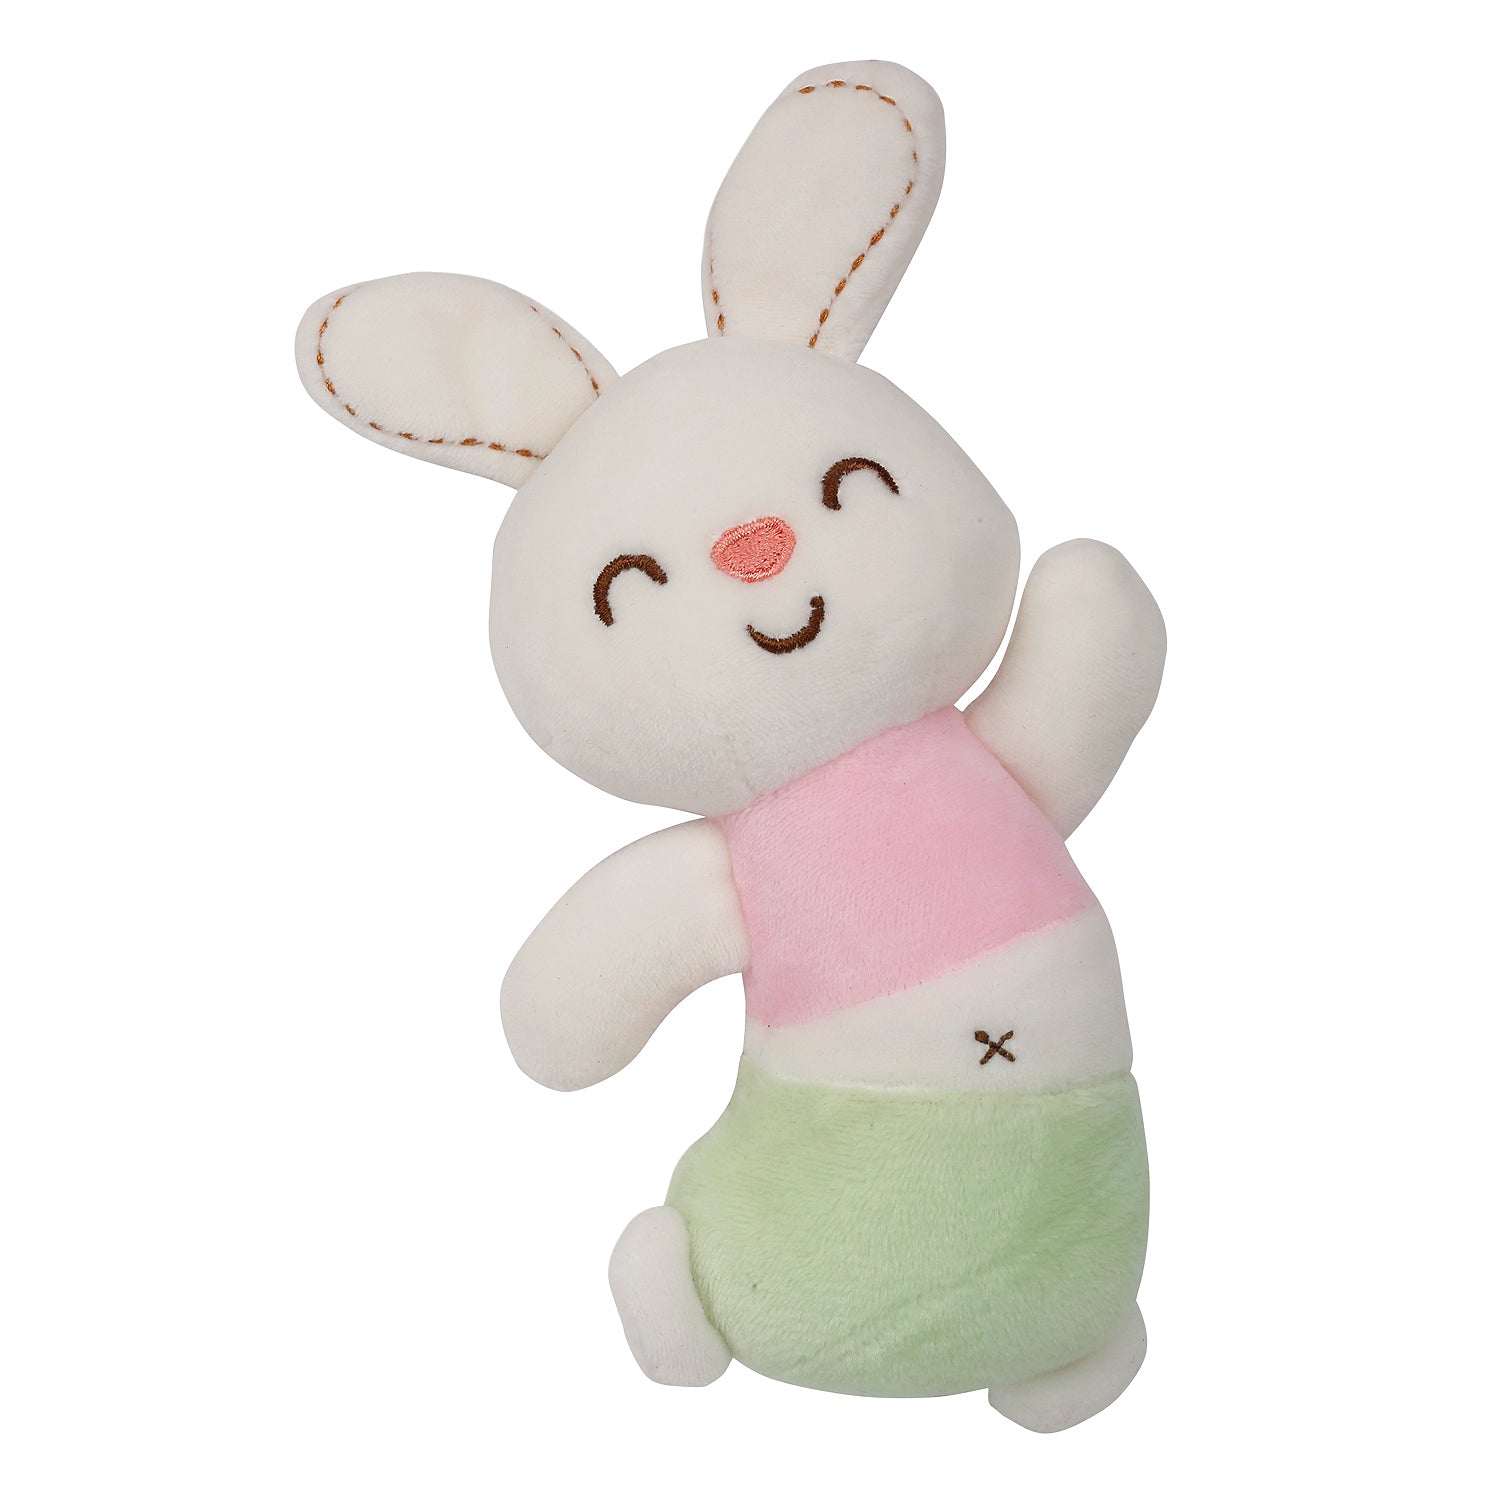 Hopping Bunny Pink Handheld Rattle Toy